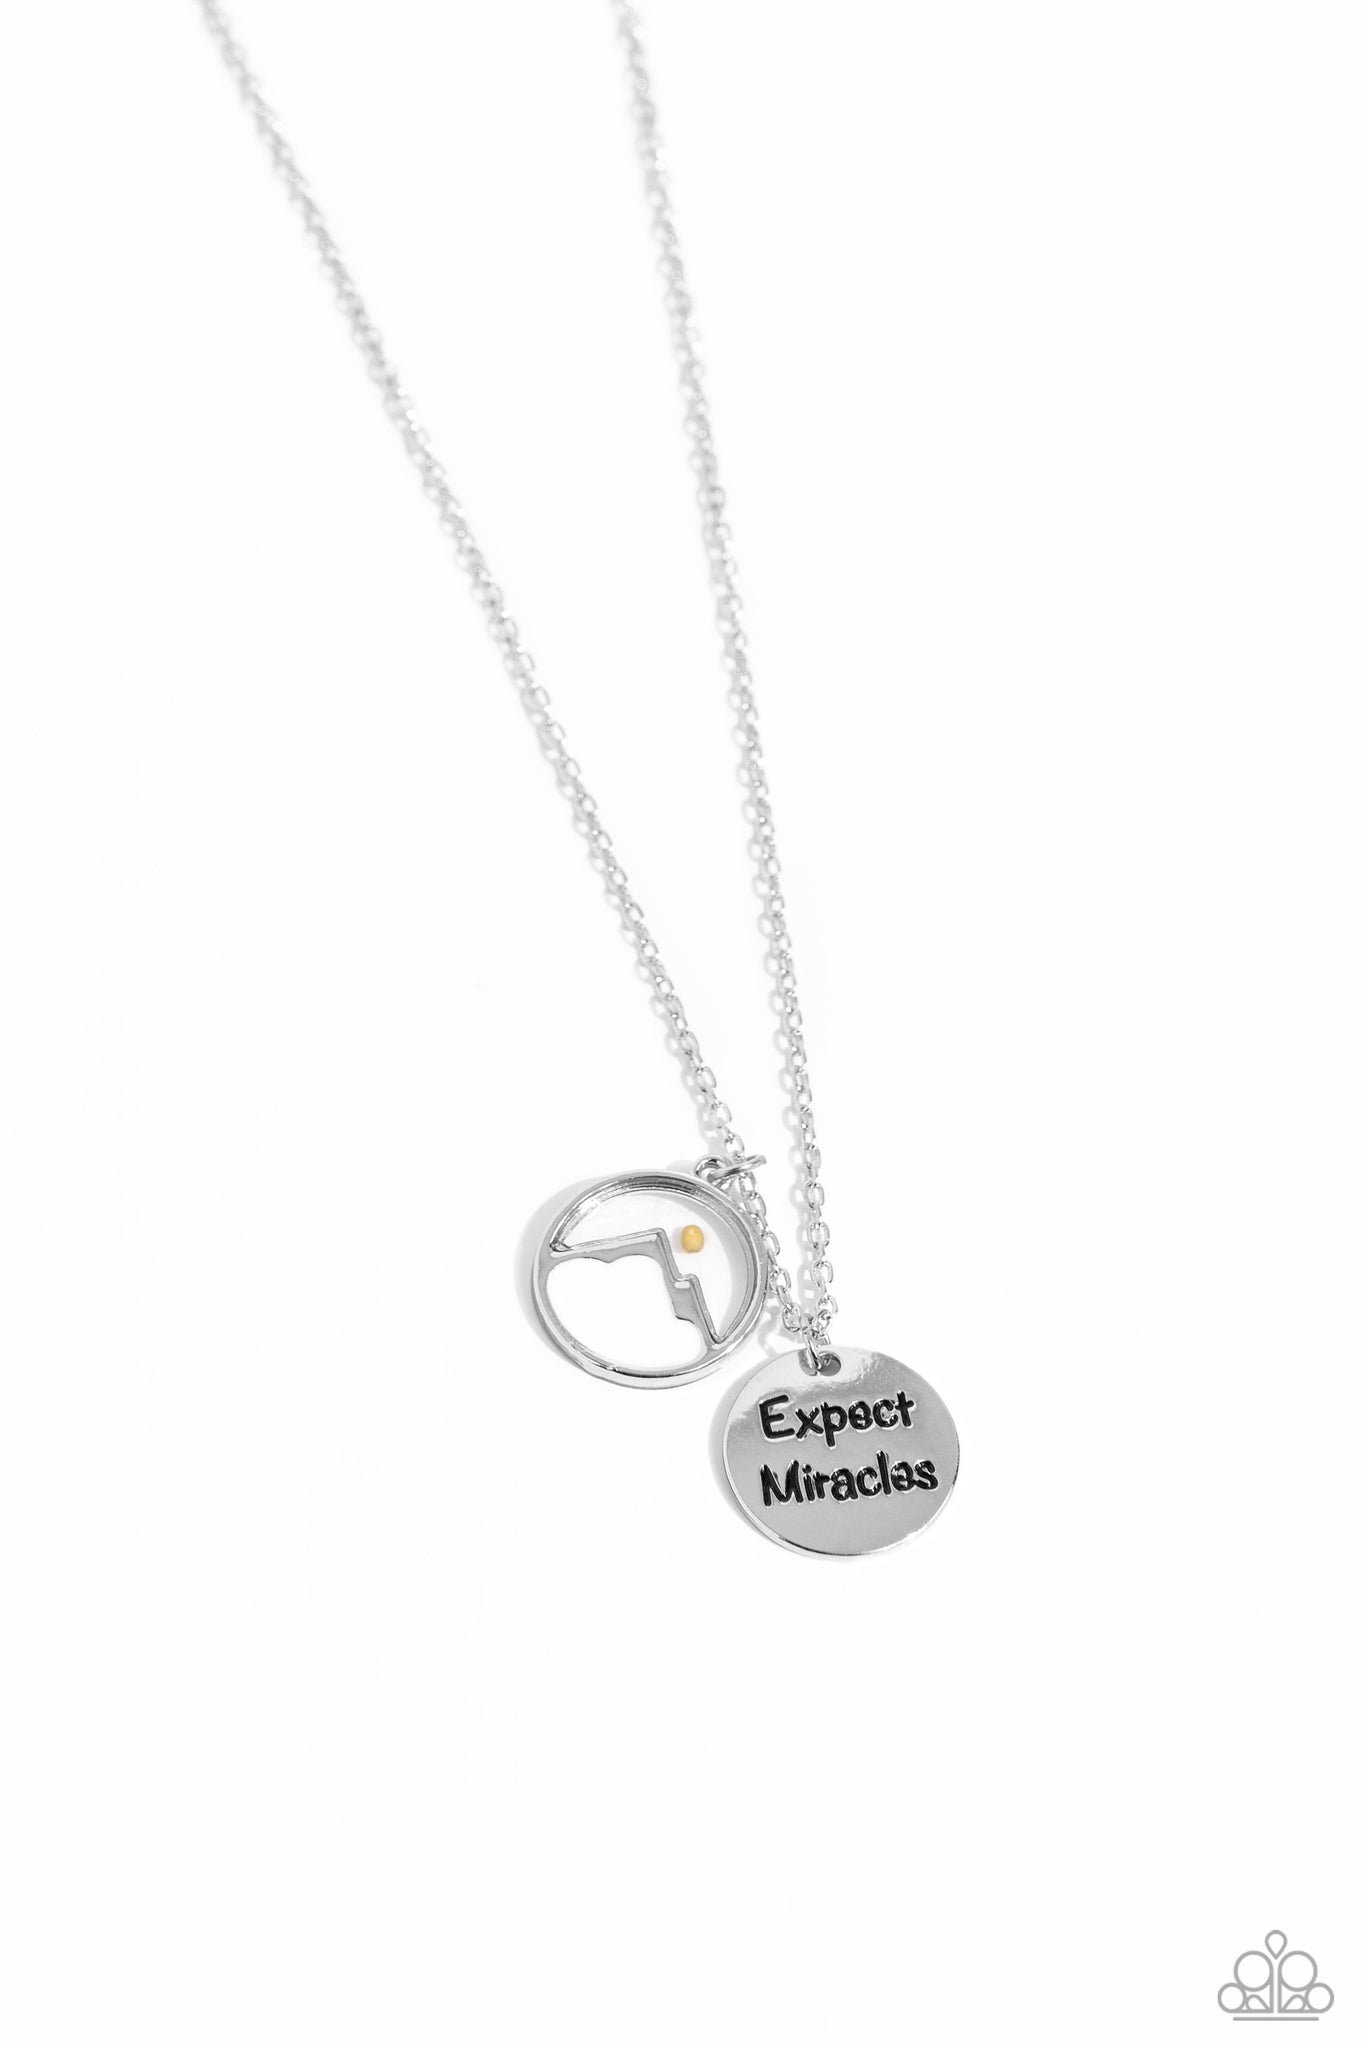 Expect Miracles Necklace (White, Gold)